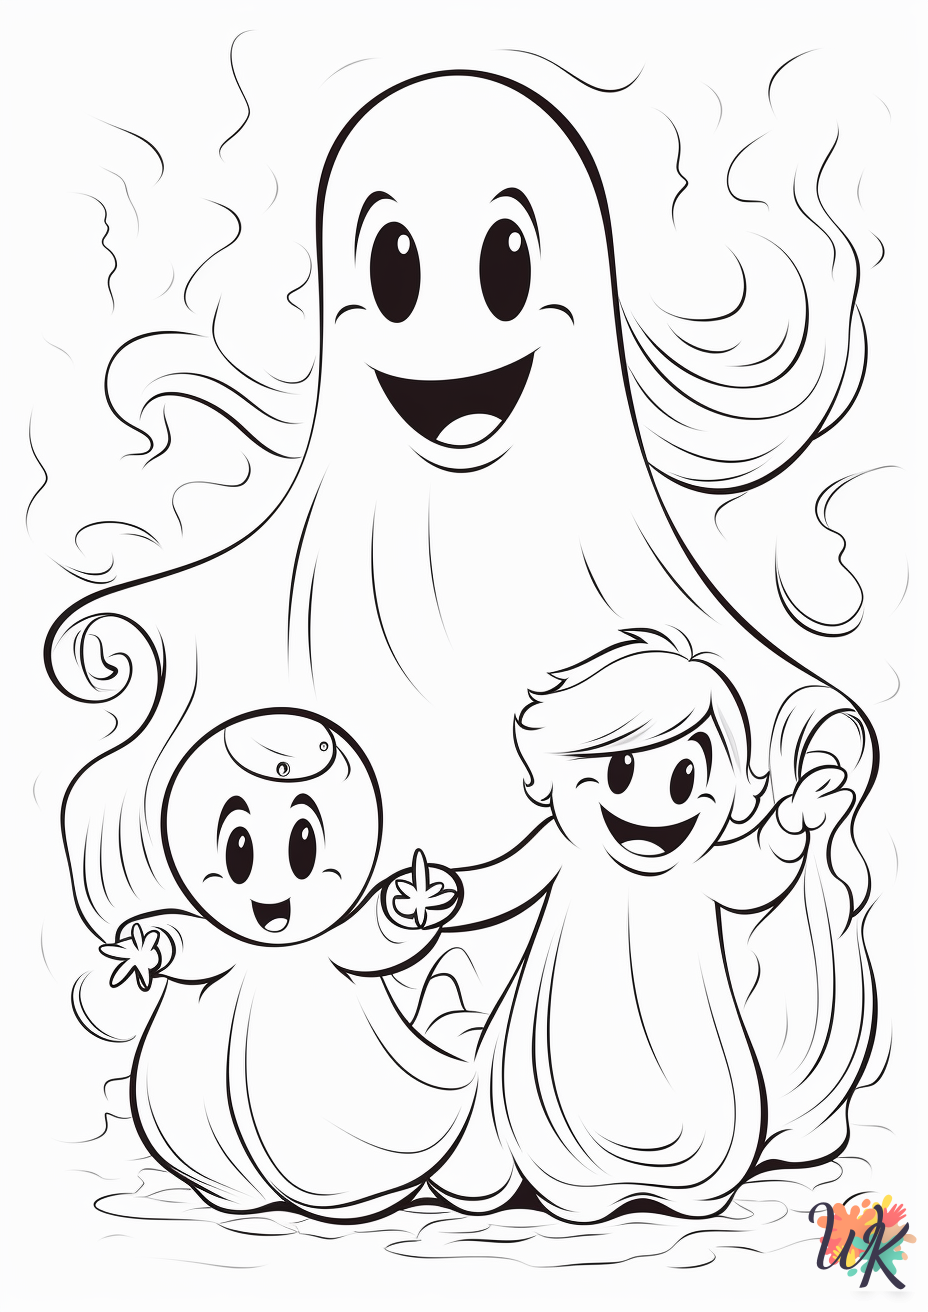 Ghost coloring pages for preschoolers